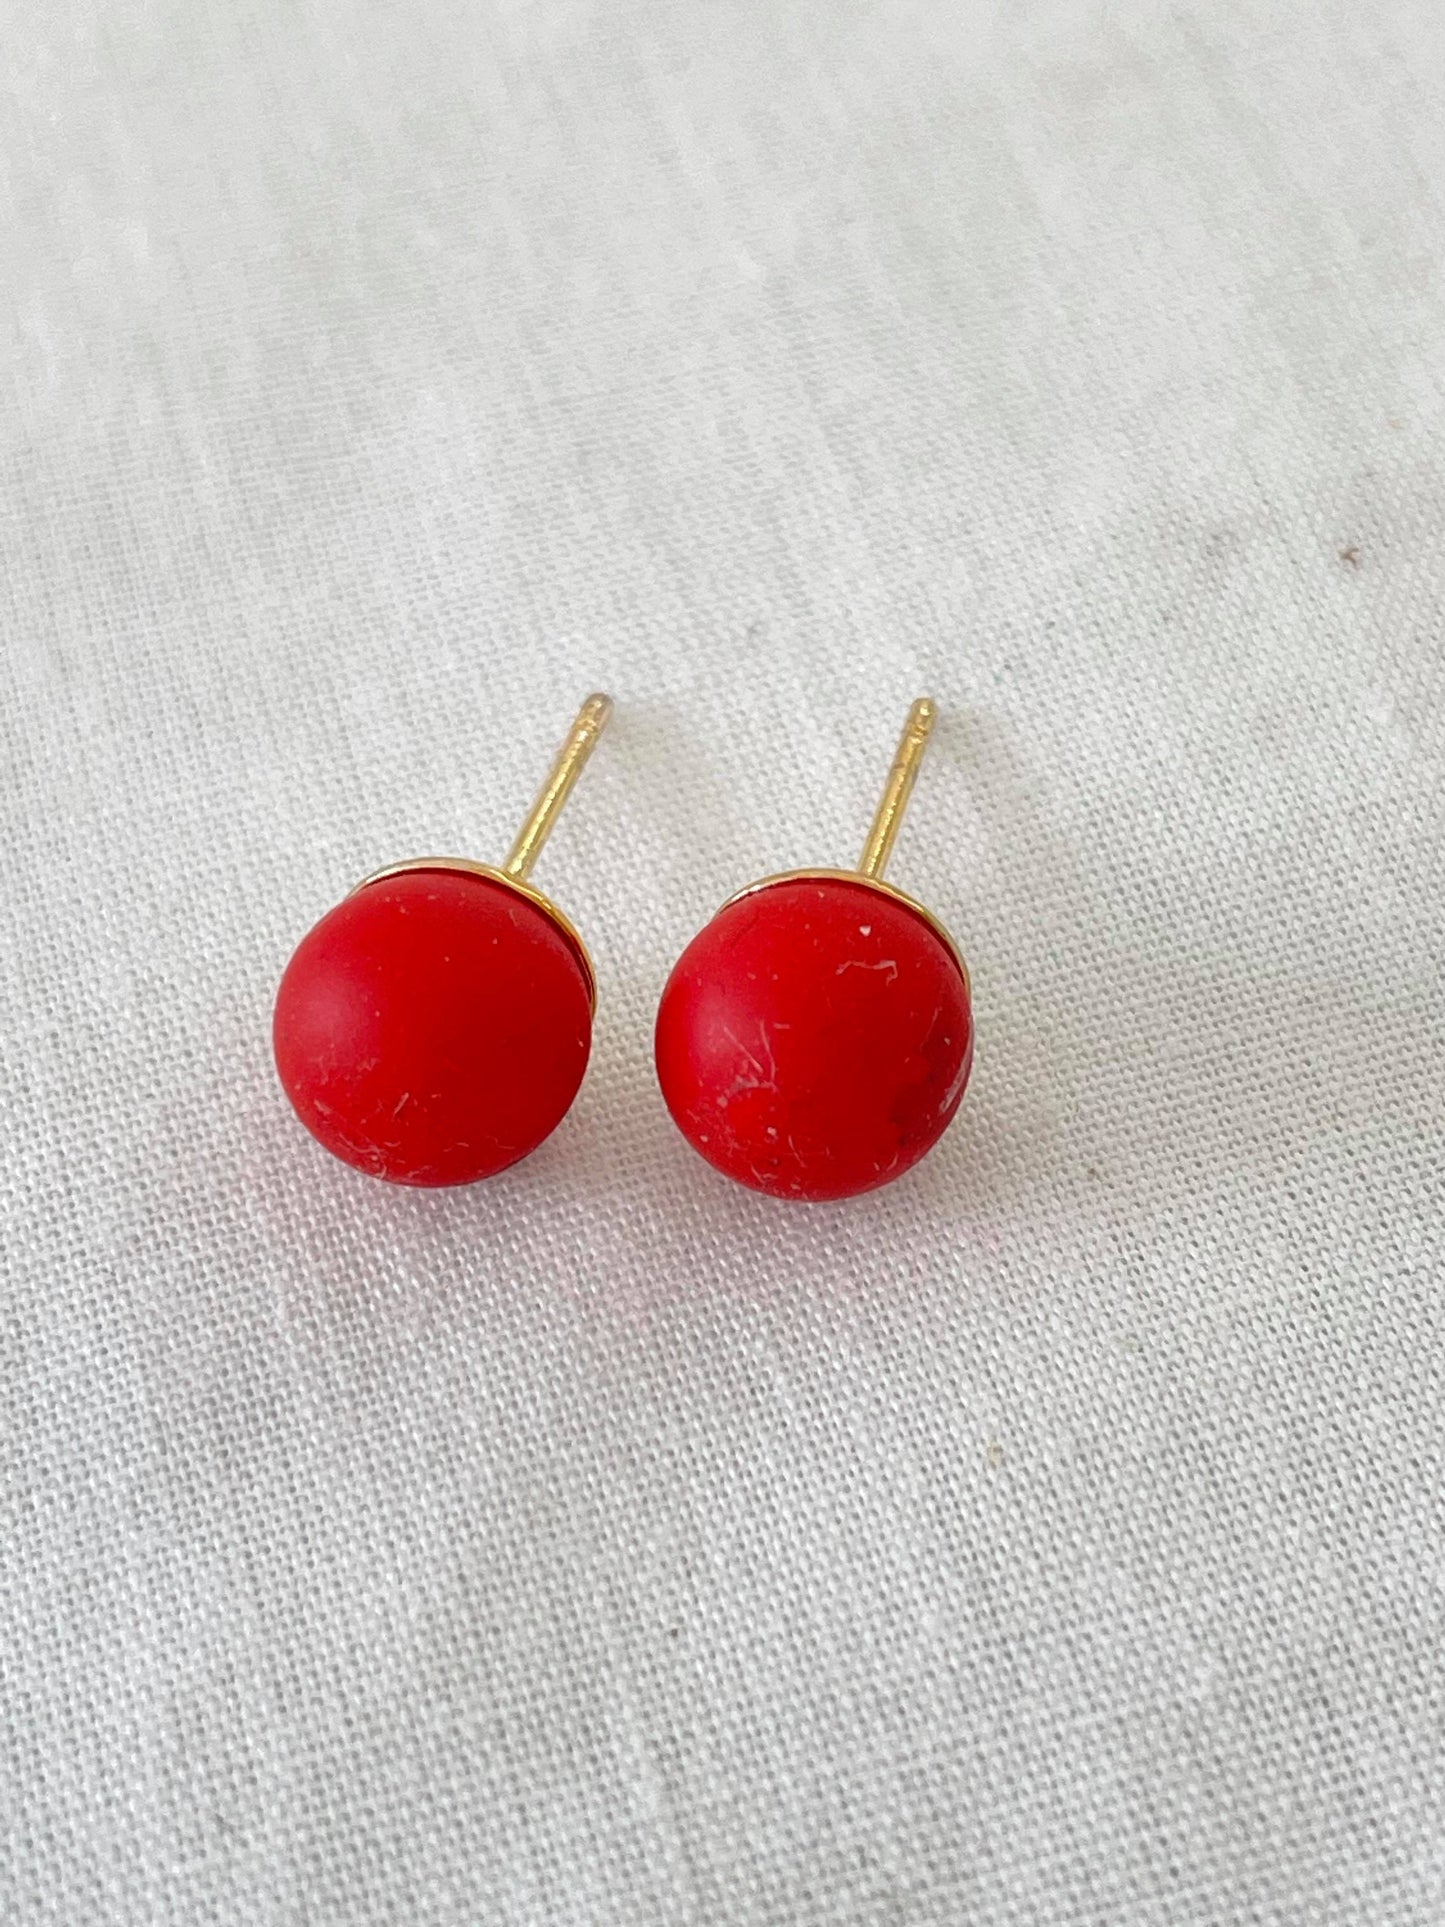 Solid red studs